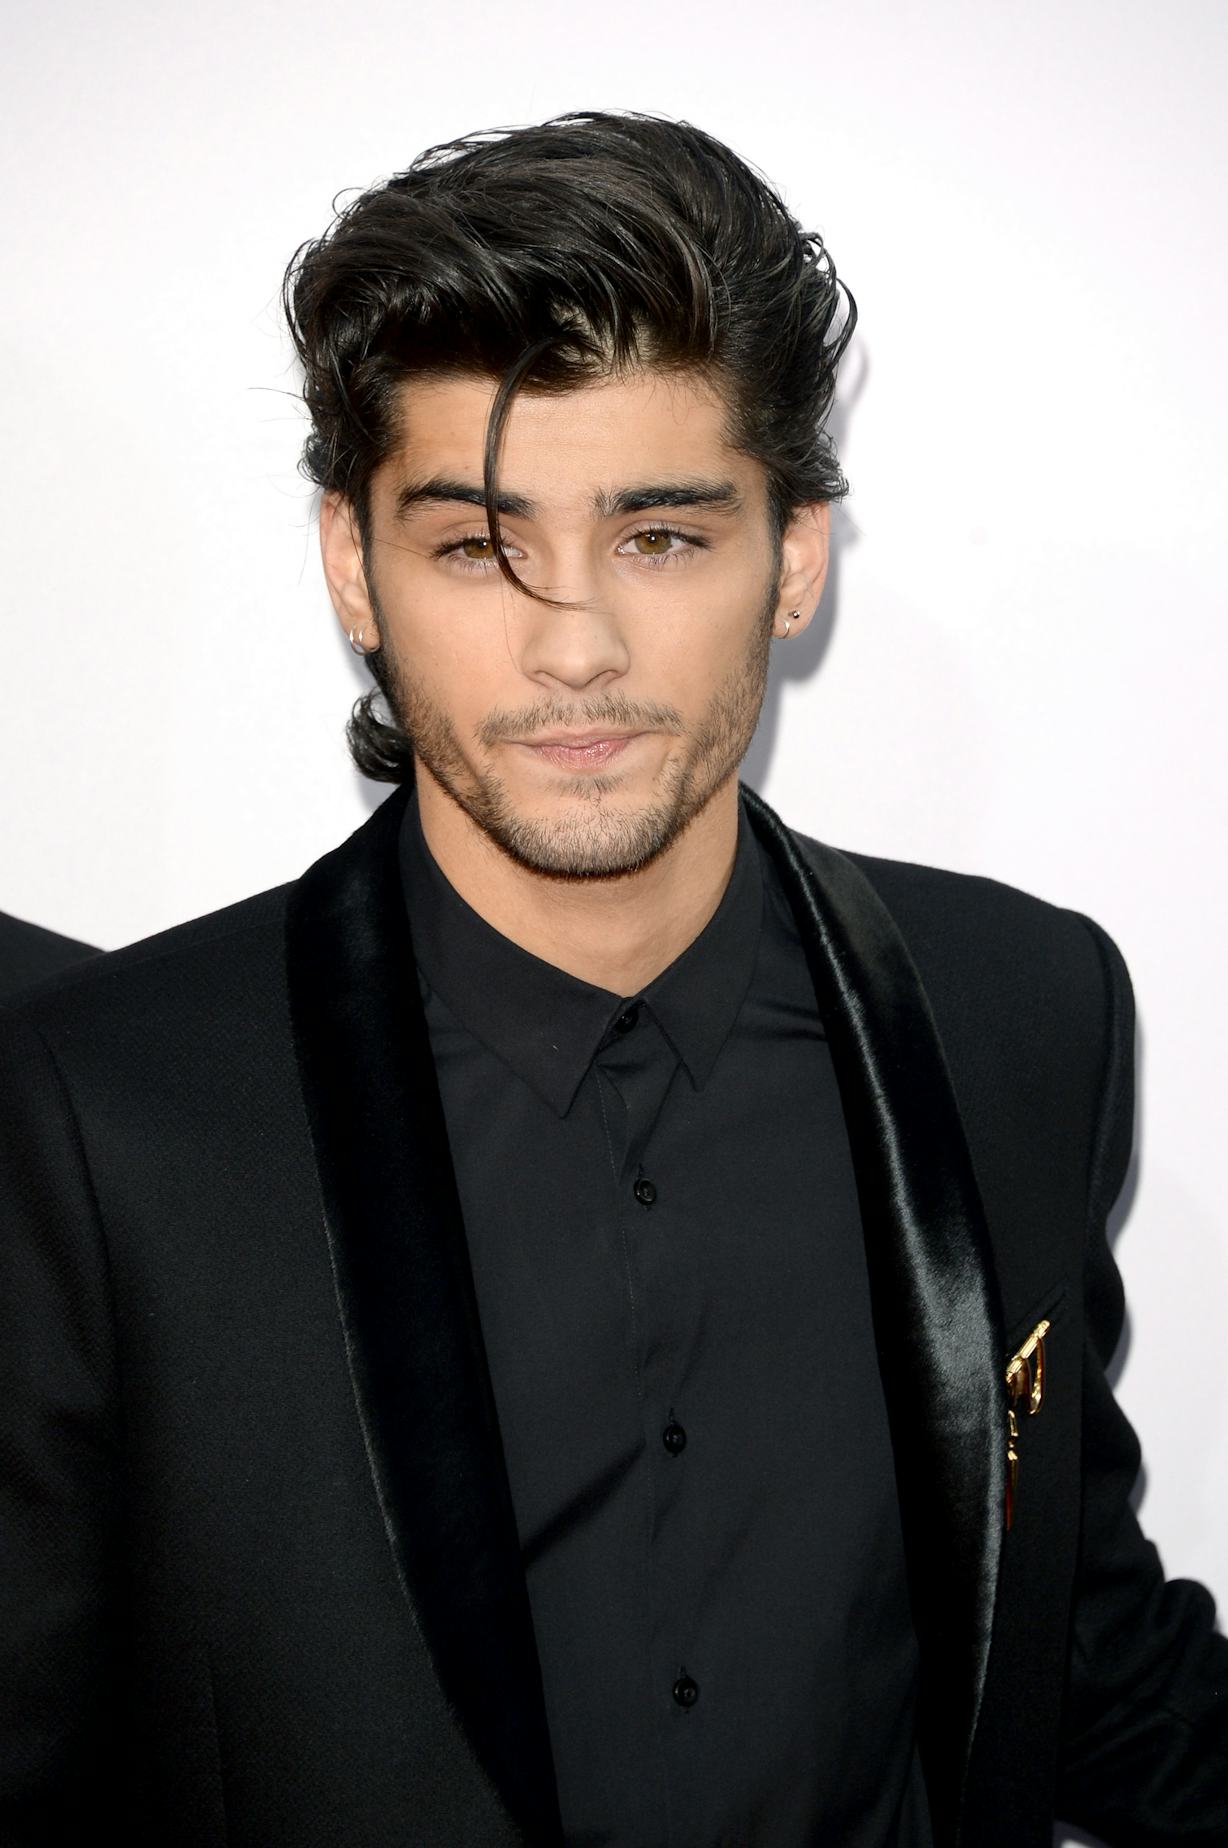 15 Zayn Malik Hair Photos That Show The Evolution Of His Luscious Locks Because You Know Youll 